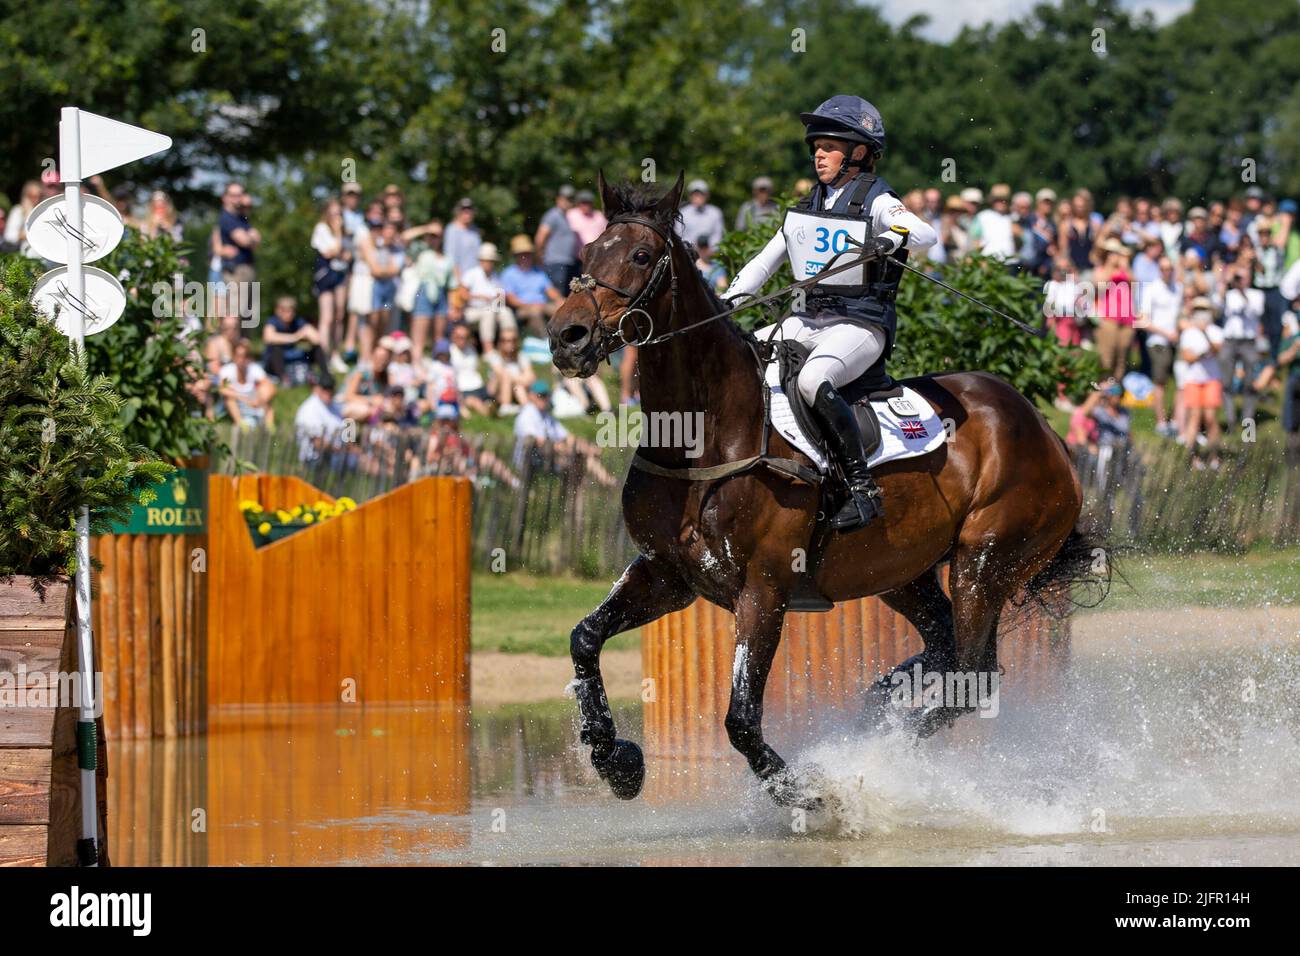 Rosalind CANTER (GBR) on Allstar B, galloping, in the water, action. Allstart B was badly injured at obstacle 16d. On the advice of the vet, the owners have decided to put the horse down. Eventing, Cross-Country C1C: SAP-Cup, on July 2nd, 2022, World Equestrian Festival, CHIO Aachen 2022 from June 24th to - 03.07.2022 in Aachen/Germany; Stock Photo